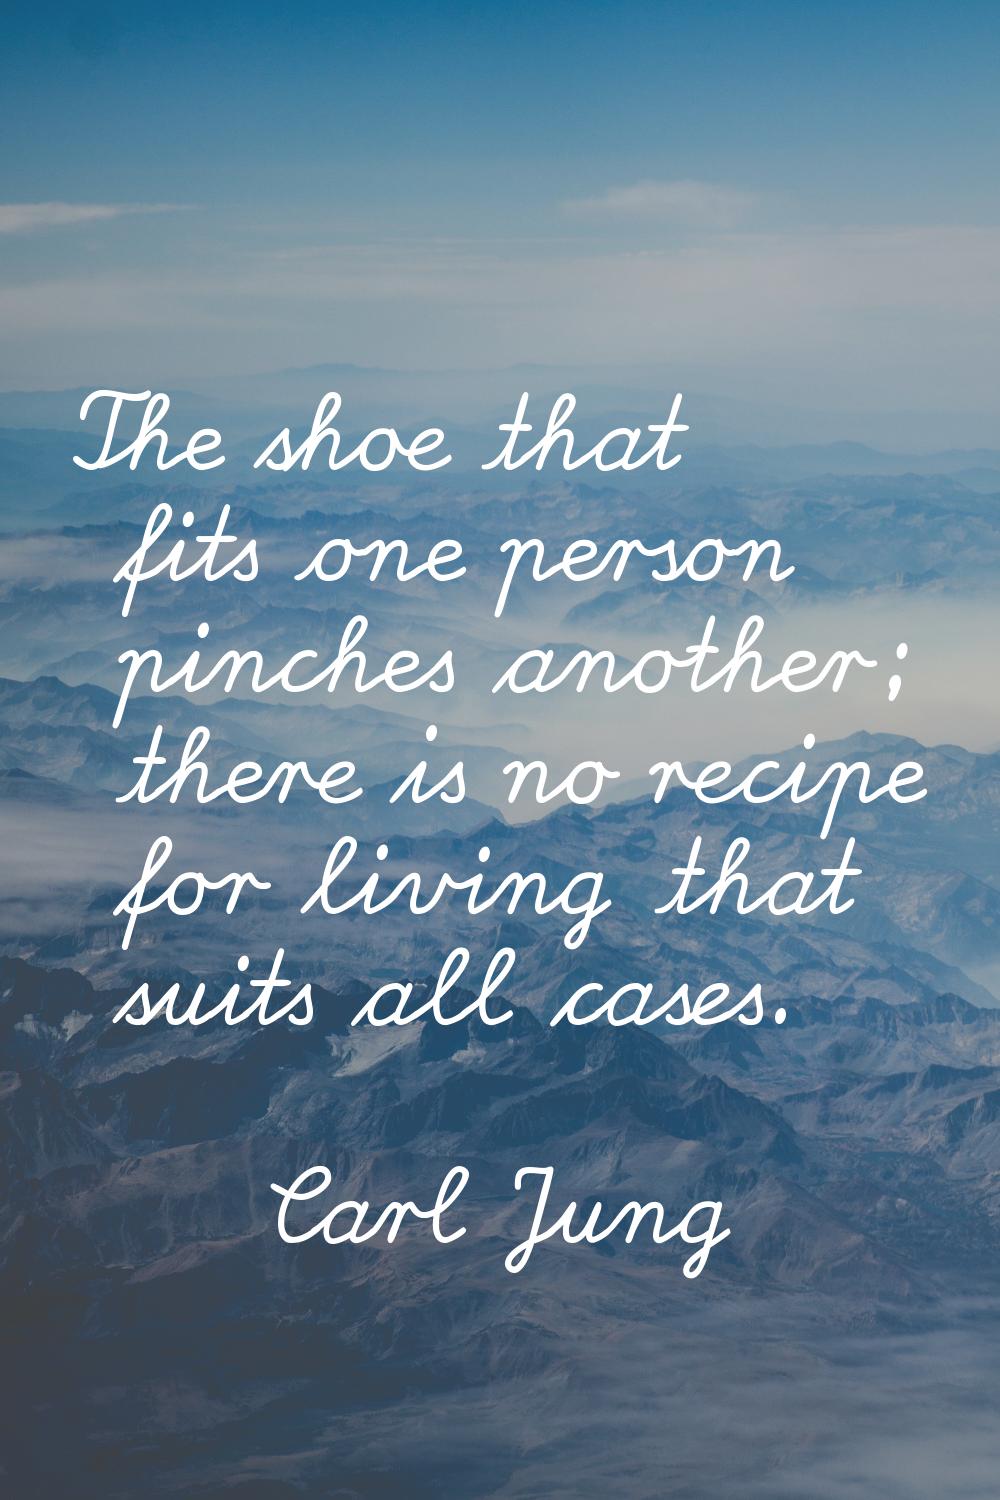 The shoe that fits one person pinches another; there is no recipe for living that suits all cases.